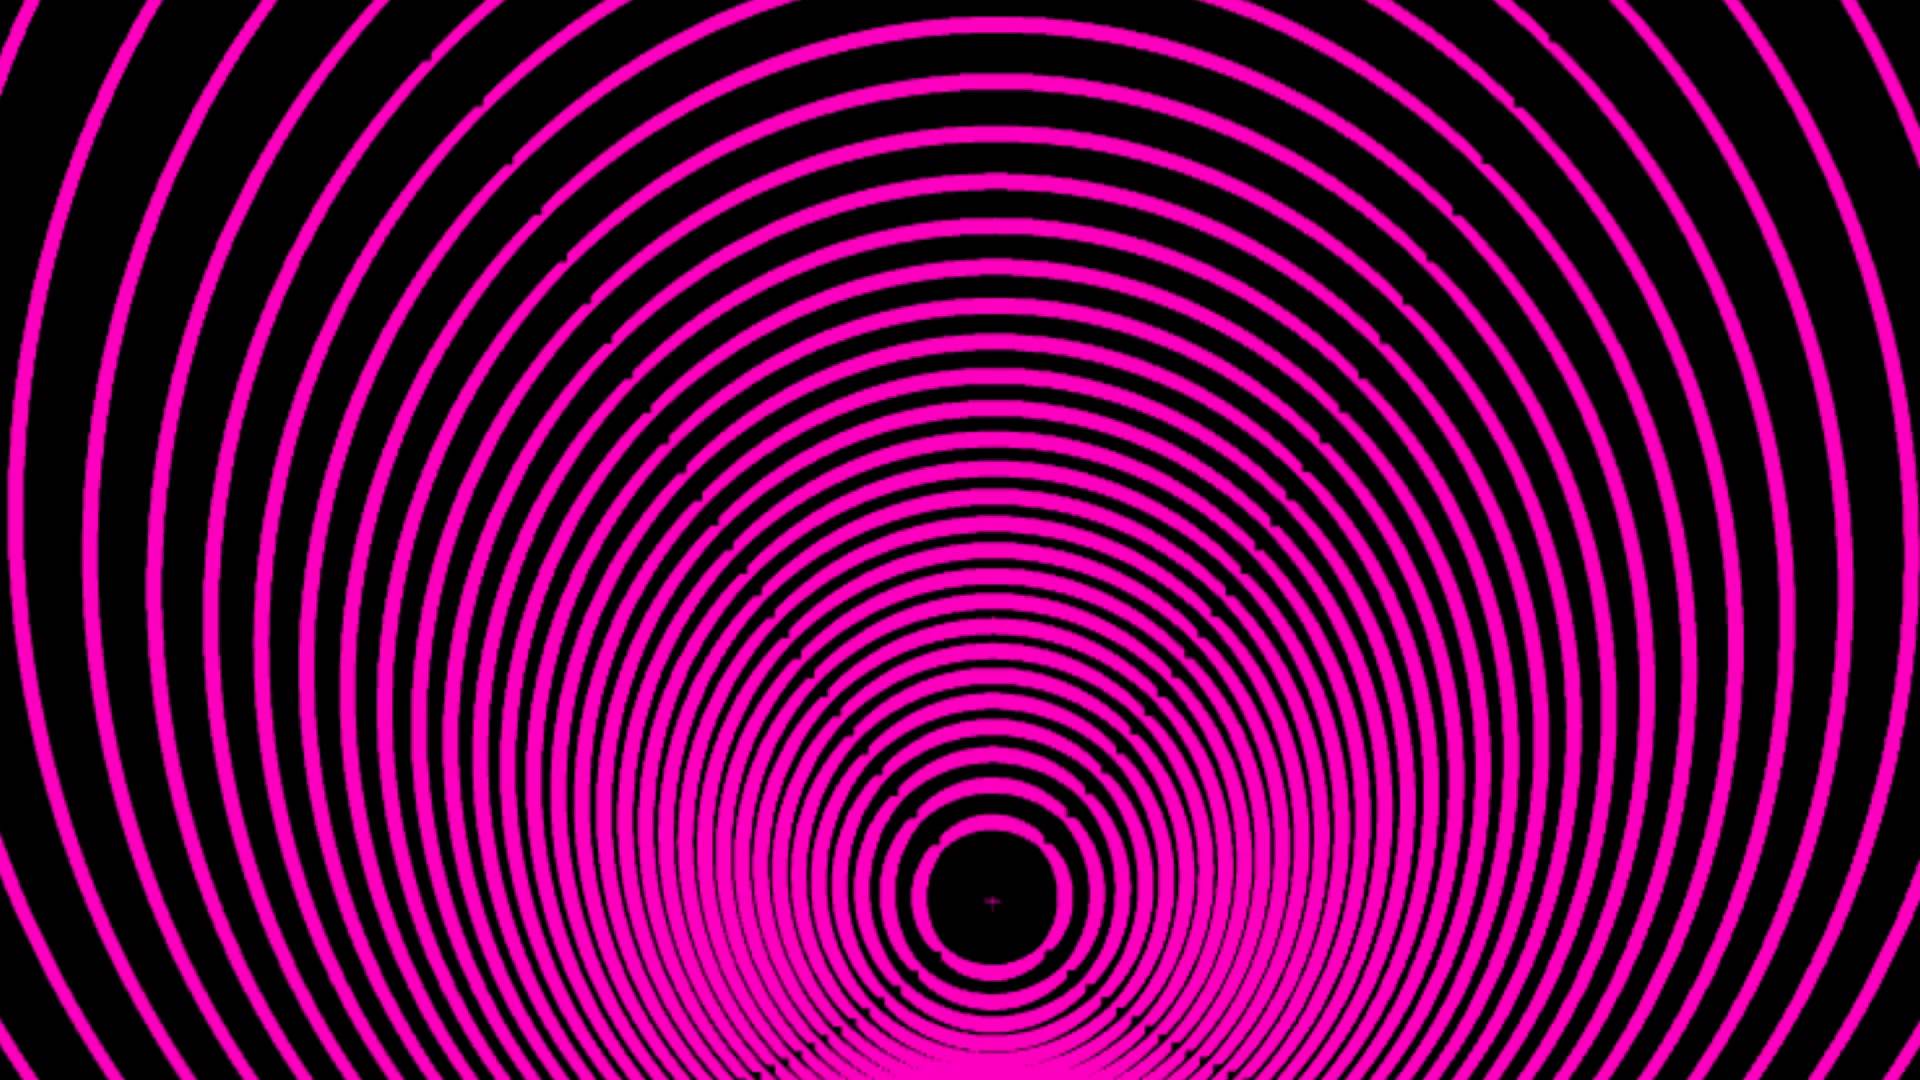 Hypnotic Tunnel ANIMATION FREE FOOTAGE HD Pink Lines Black